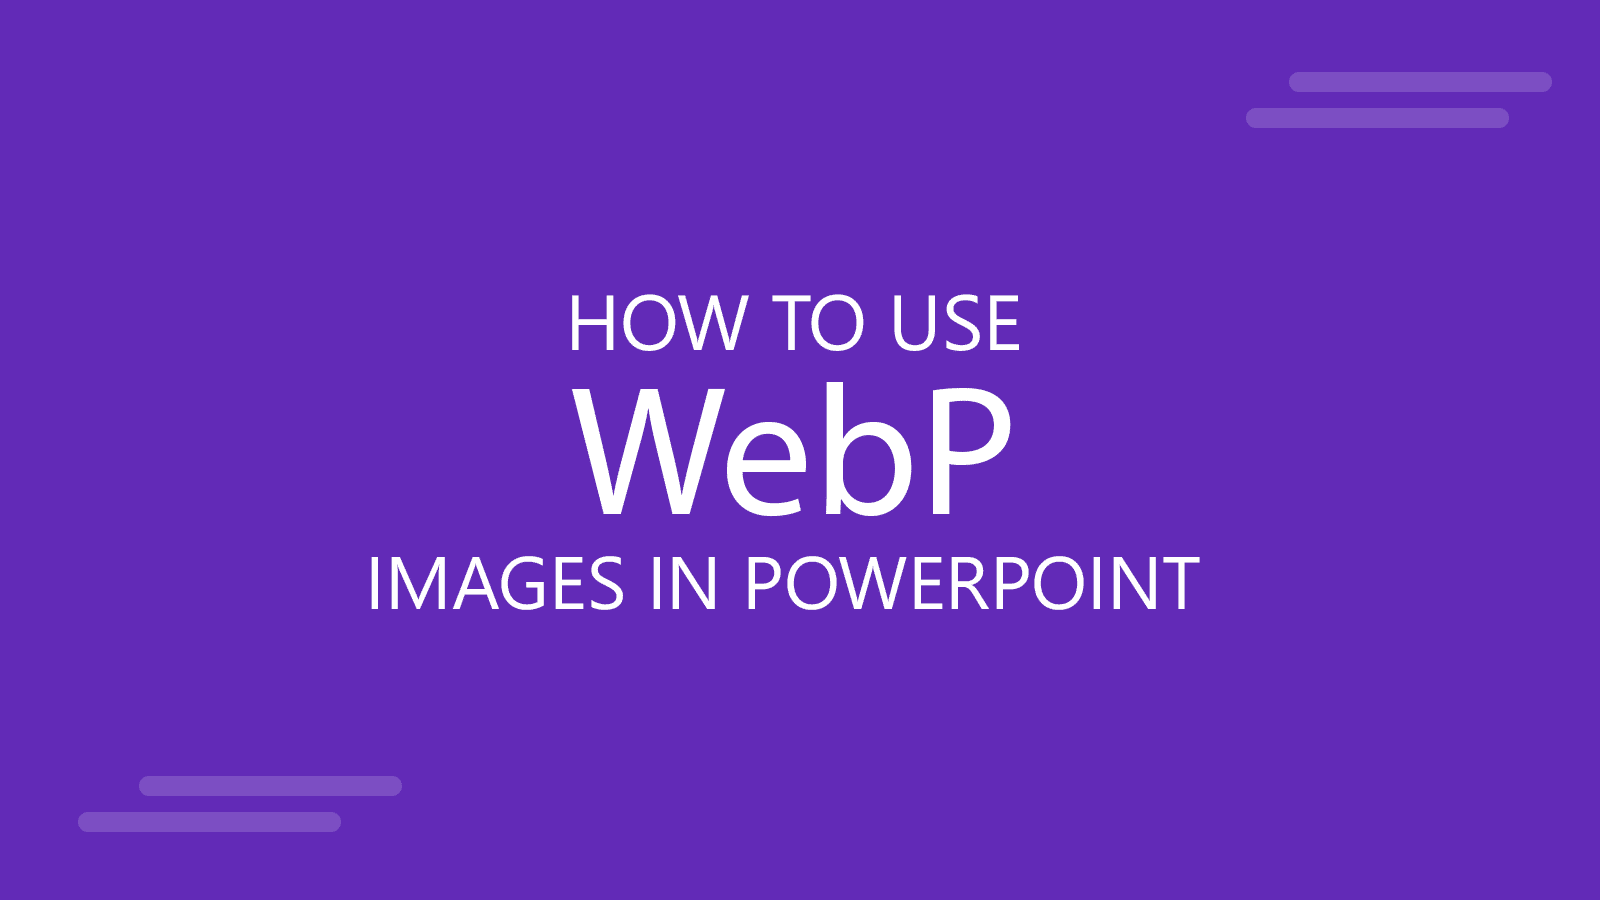 How to Use WebP Images in PowerPoint